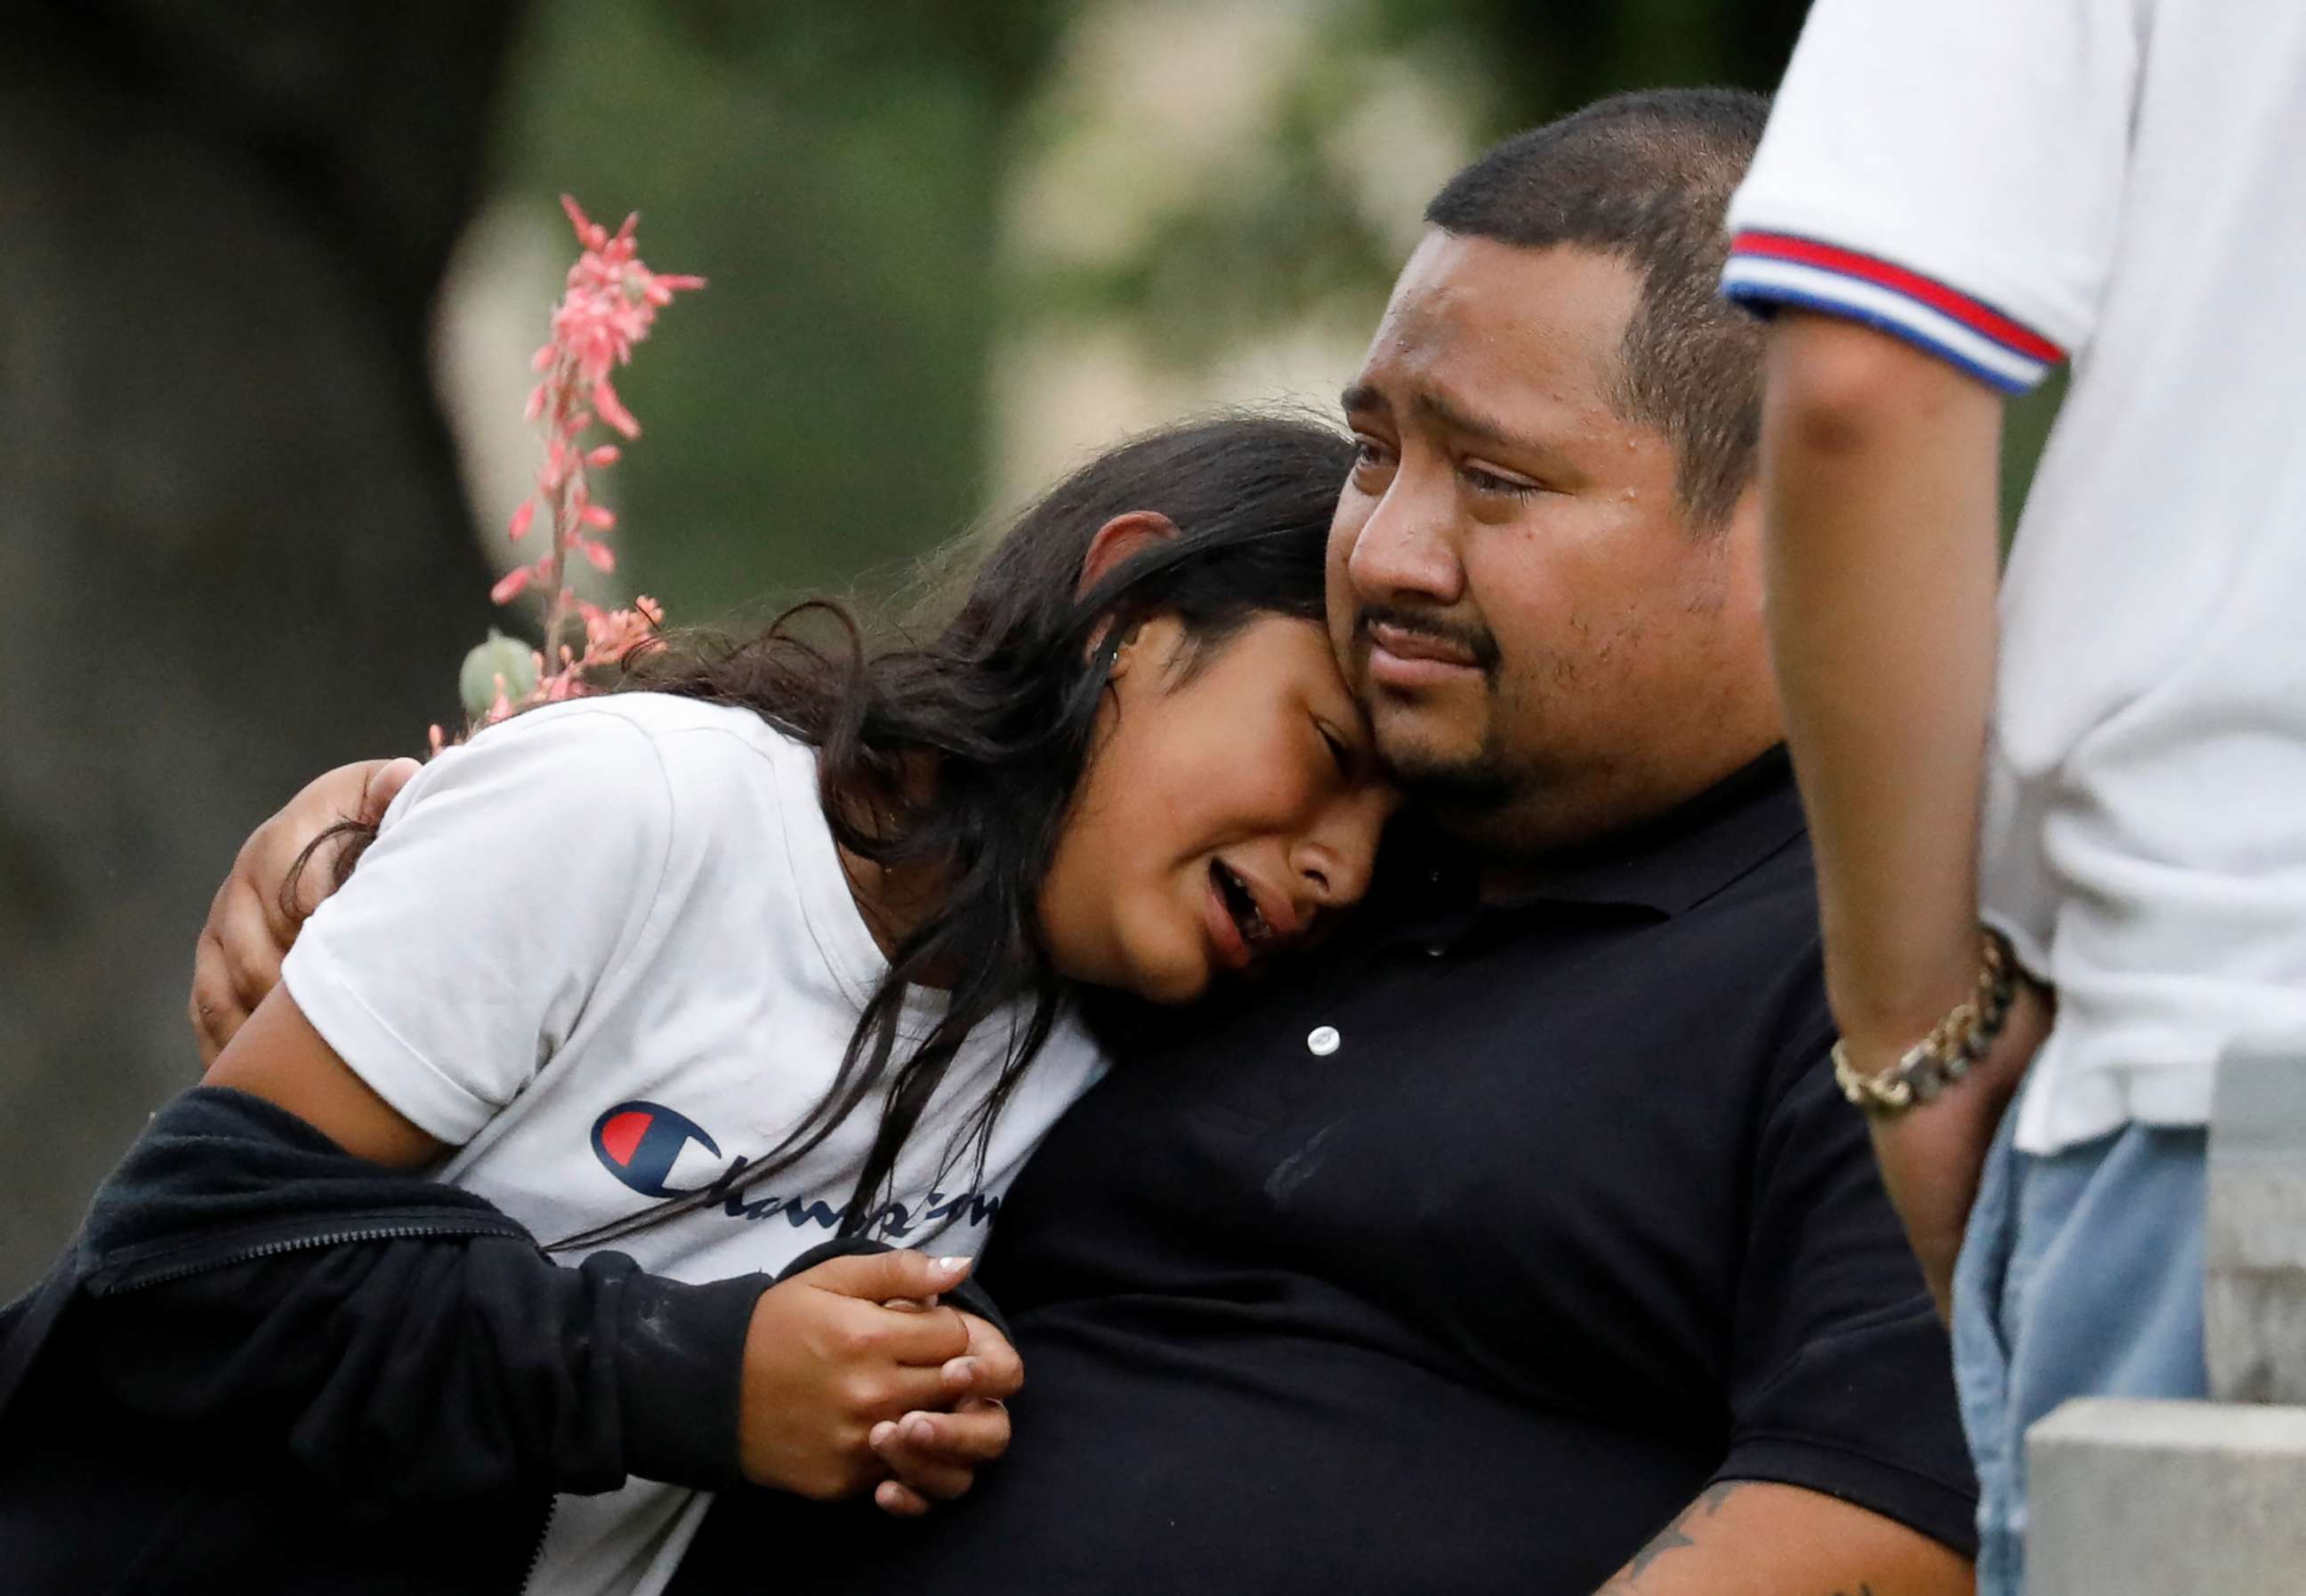 PHOTO: People react outside the Ssgt Willie de Leon Civic Center, where students had been transported from Robb Elementary School after a shooting, in Uvalde, Texas, May 24, 2022.